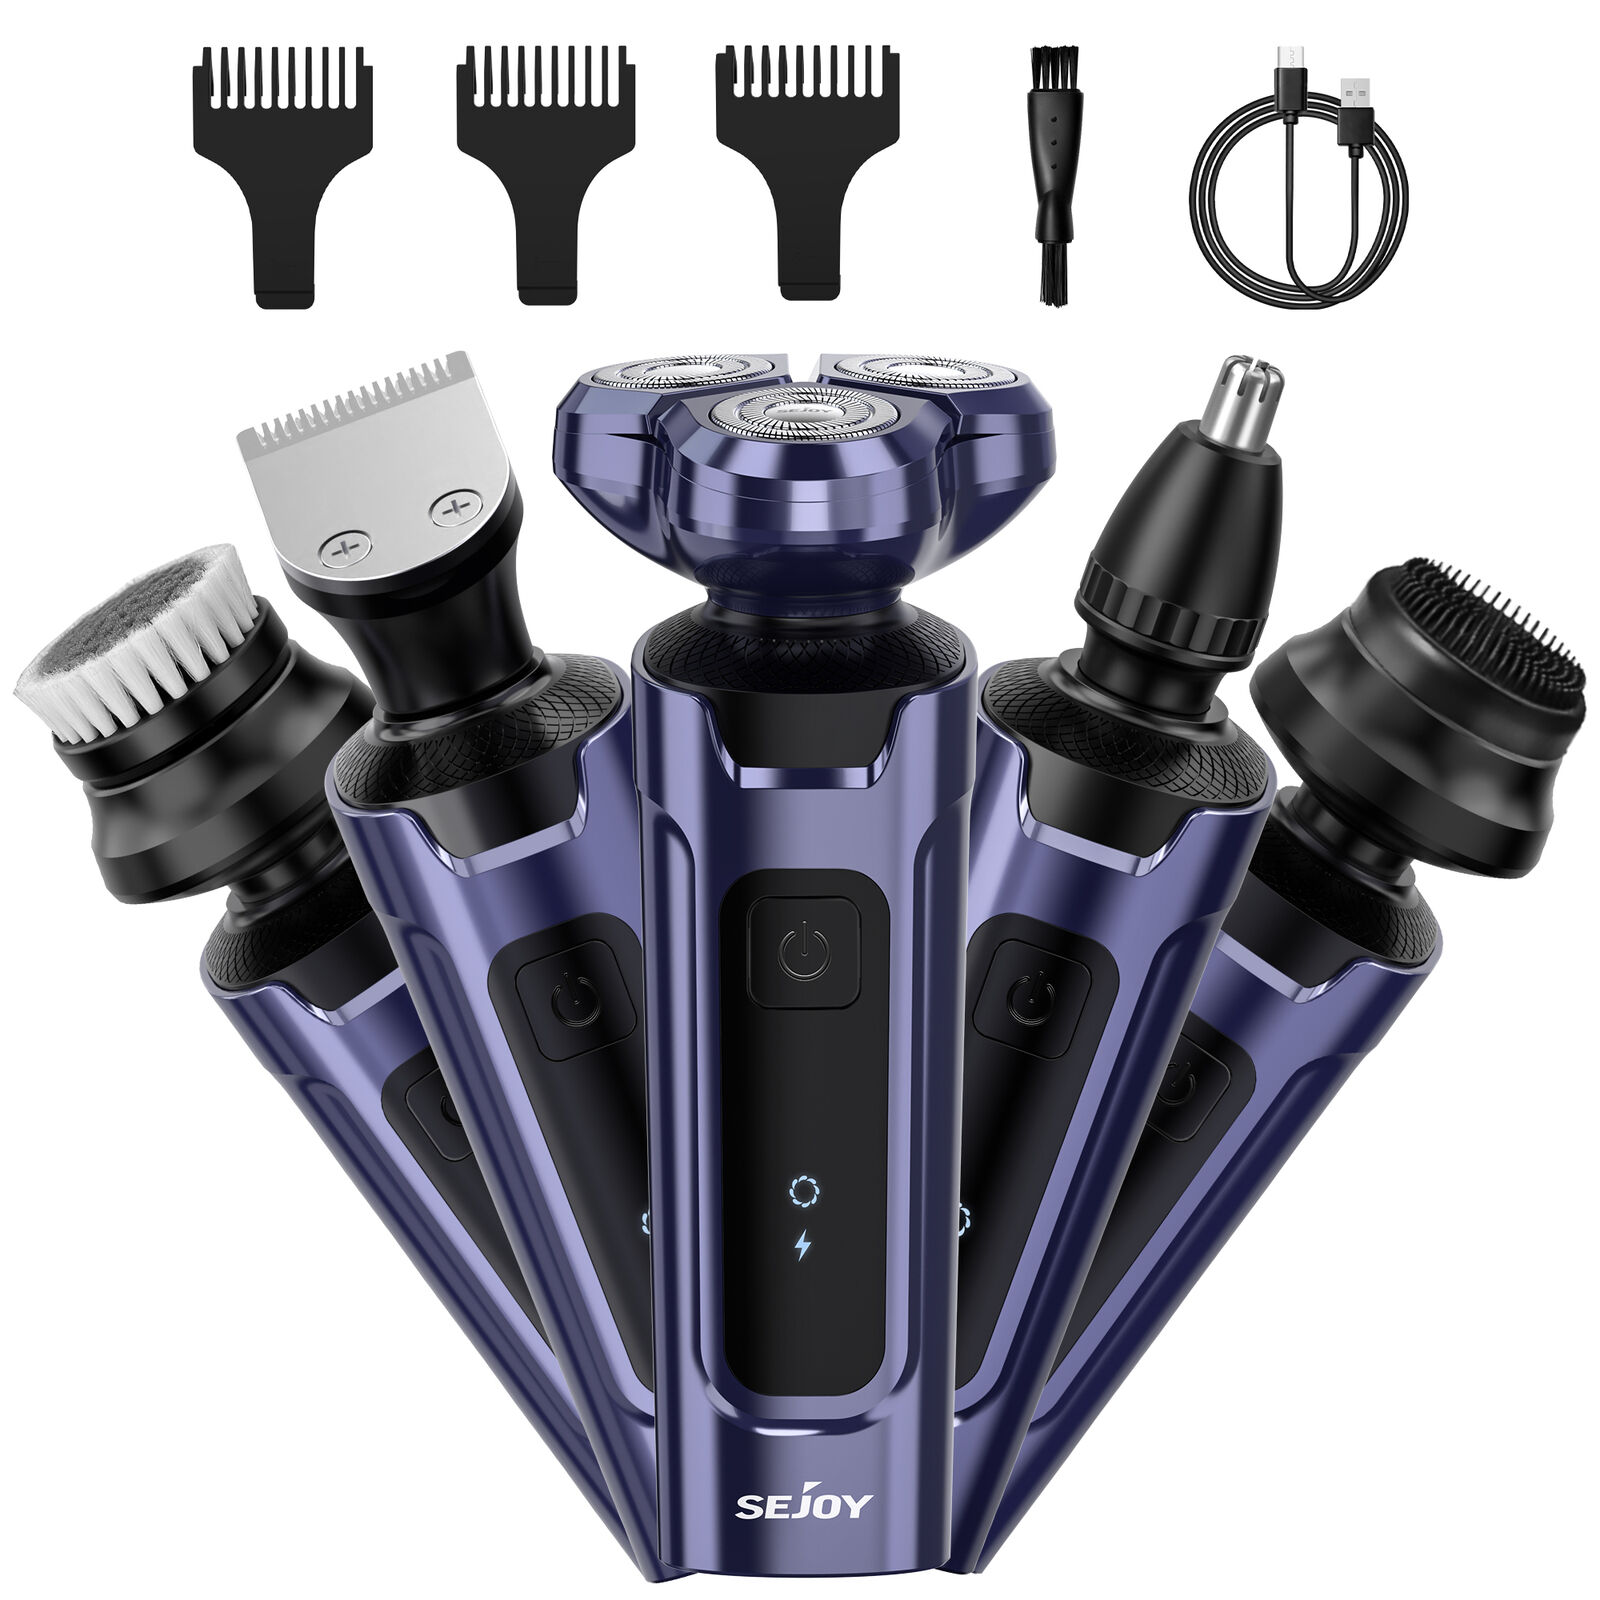 5 in 1 Electric Rotary Shaver Beard Nose Hair Trimmer Wet and Dry Razor for Men